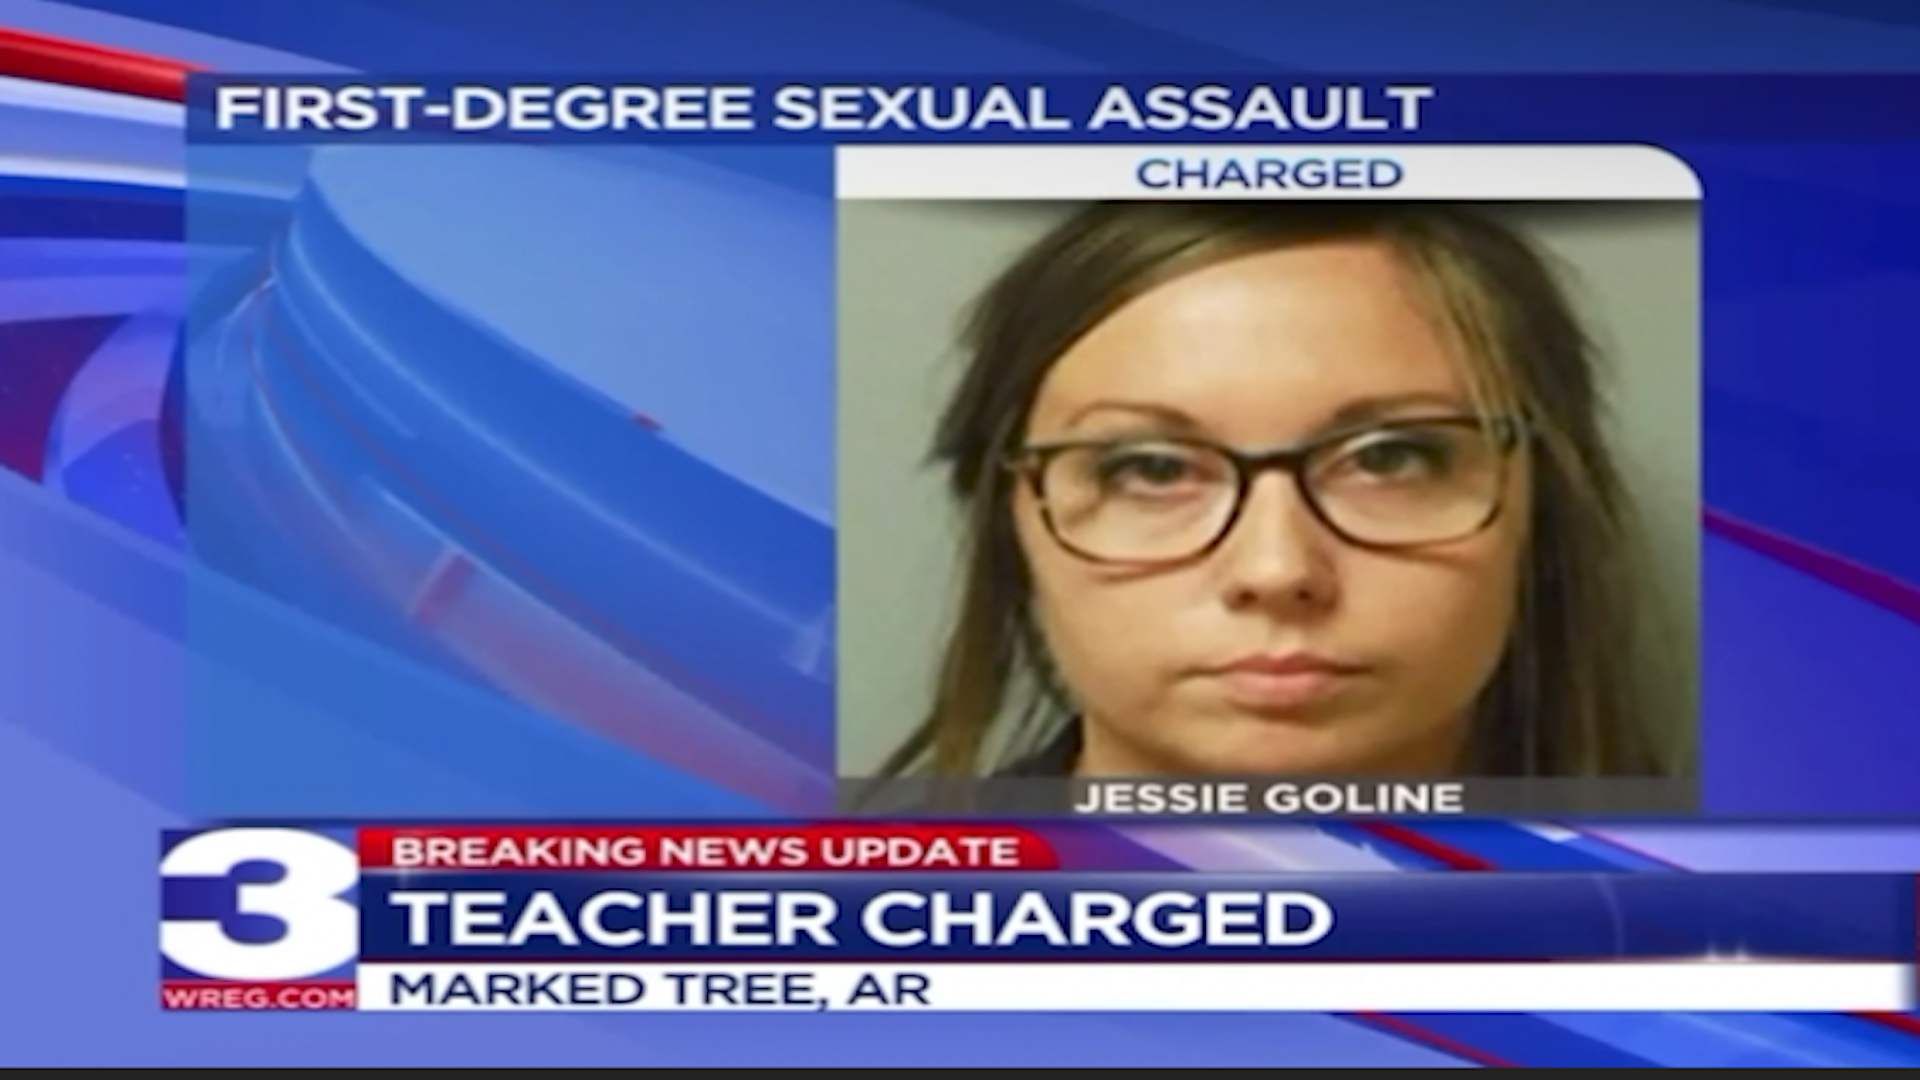 Florida Middle School Teacher Accused Of Having Sexual Relationship With 14 Year Old Student The Washington Post